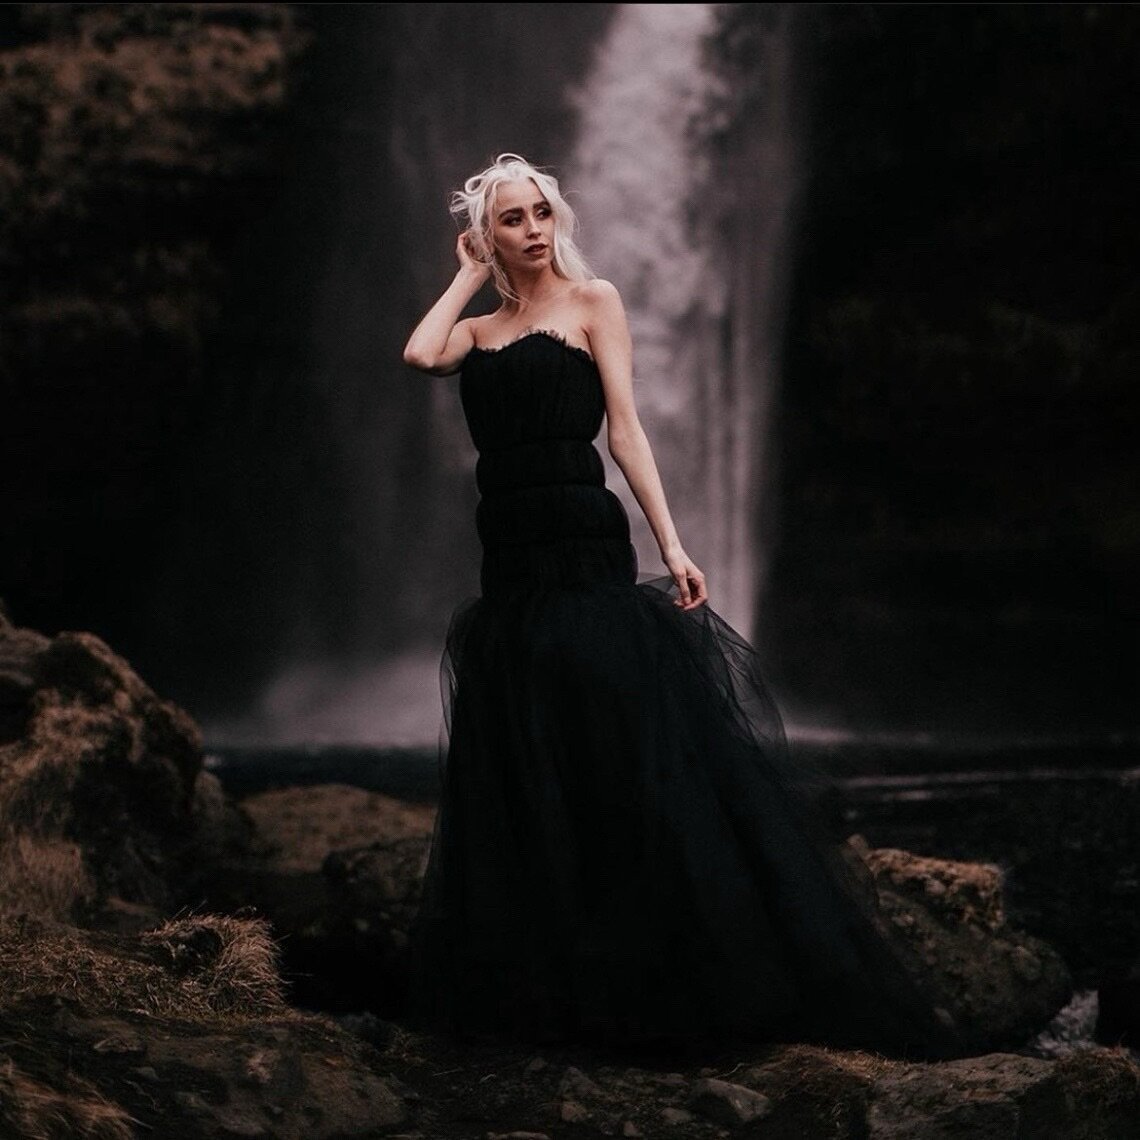 Black Swan Gown 🖤 
Gluggafoss, Iceland

#bridal #bridalcouture #couture #blackweddinggown #corsetgown